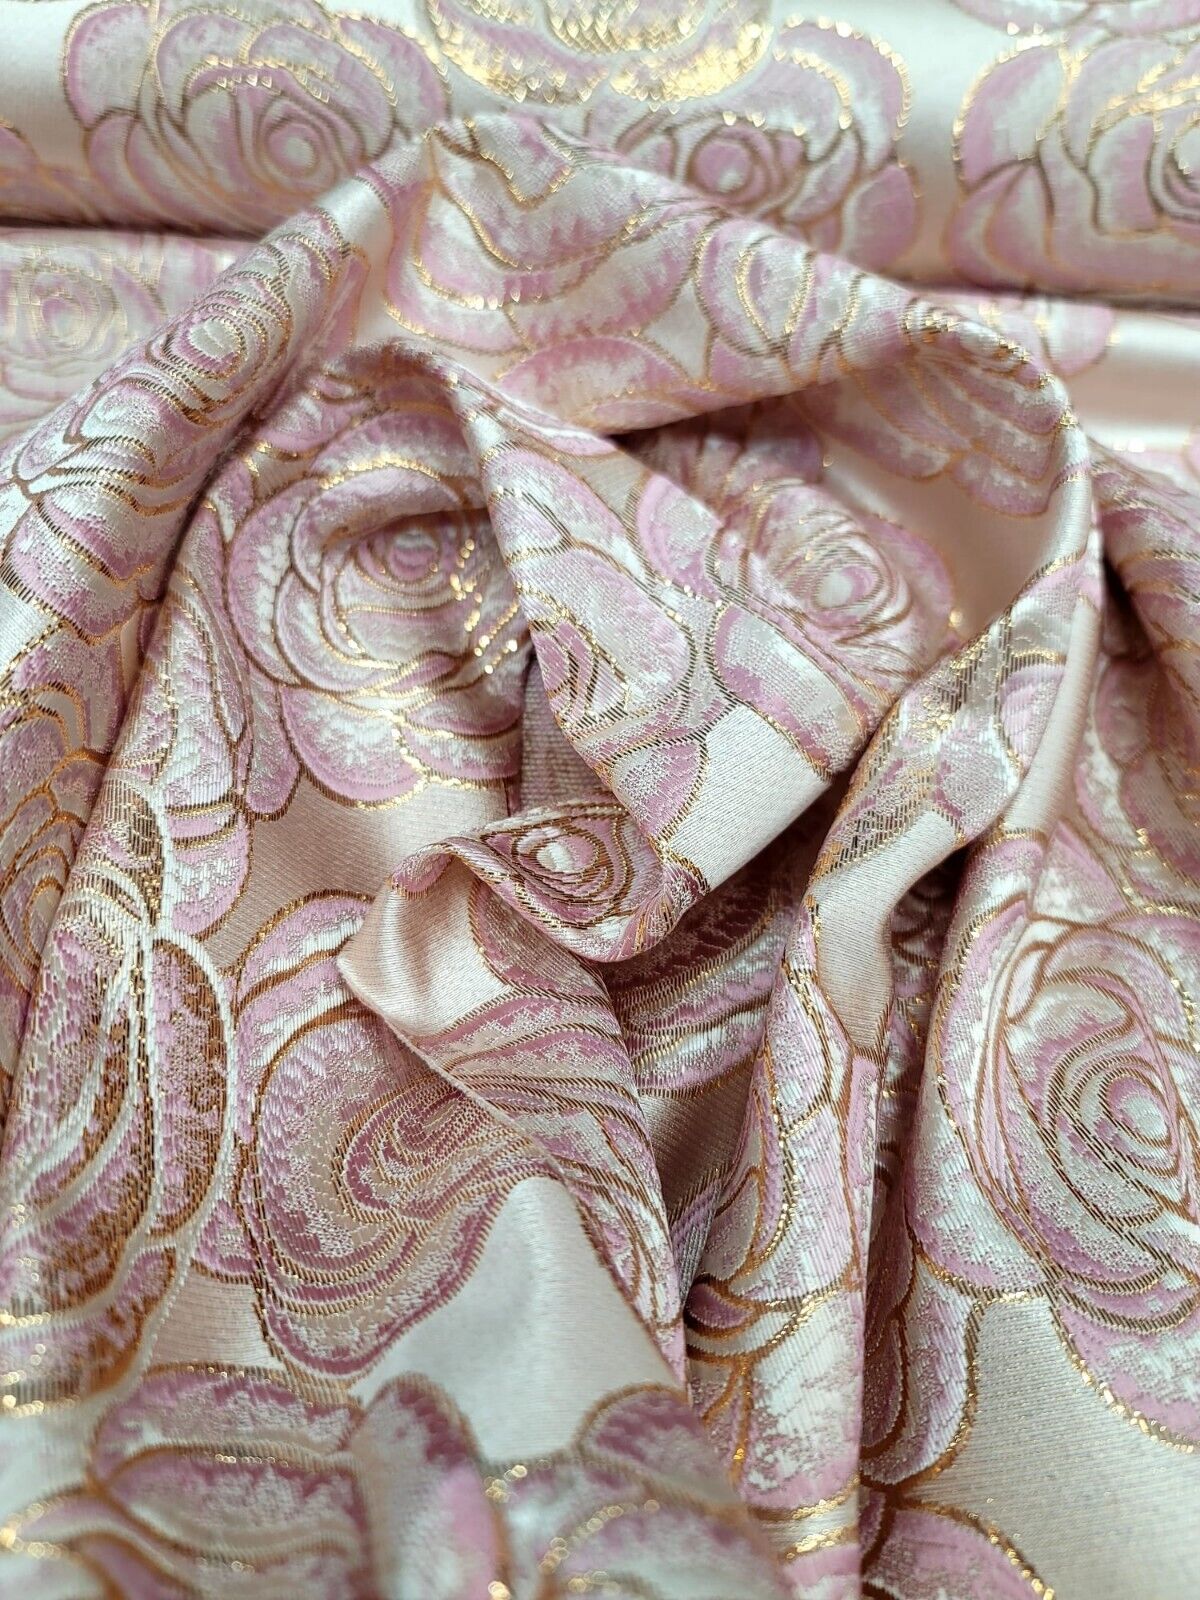 Pink Rose Floral Fabric by The Yard Prom Bridal Quinceañera Beige Backgr